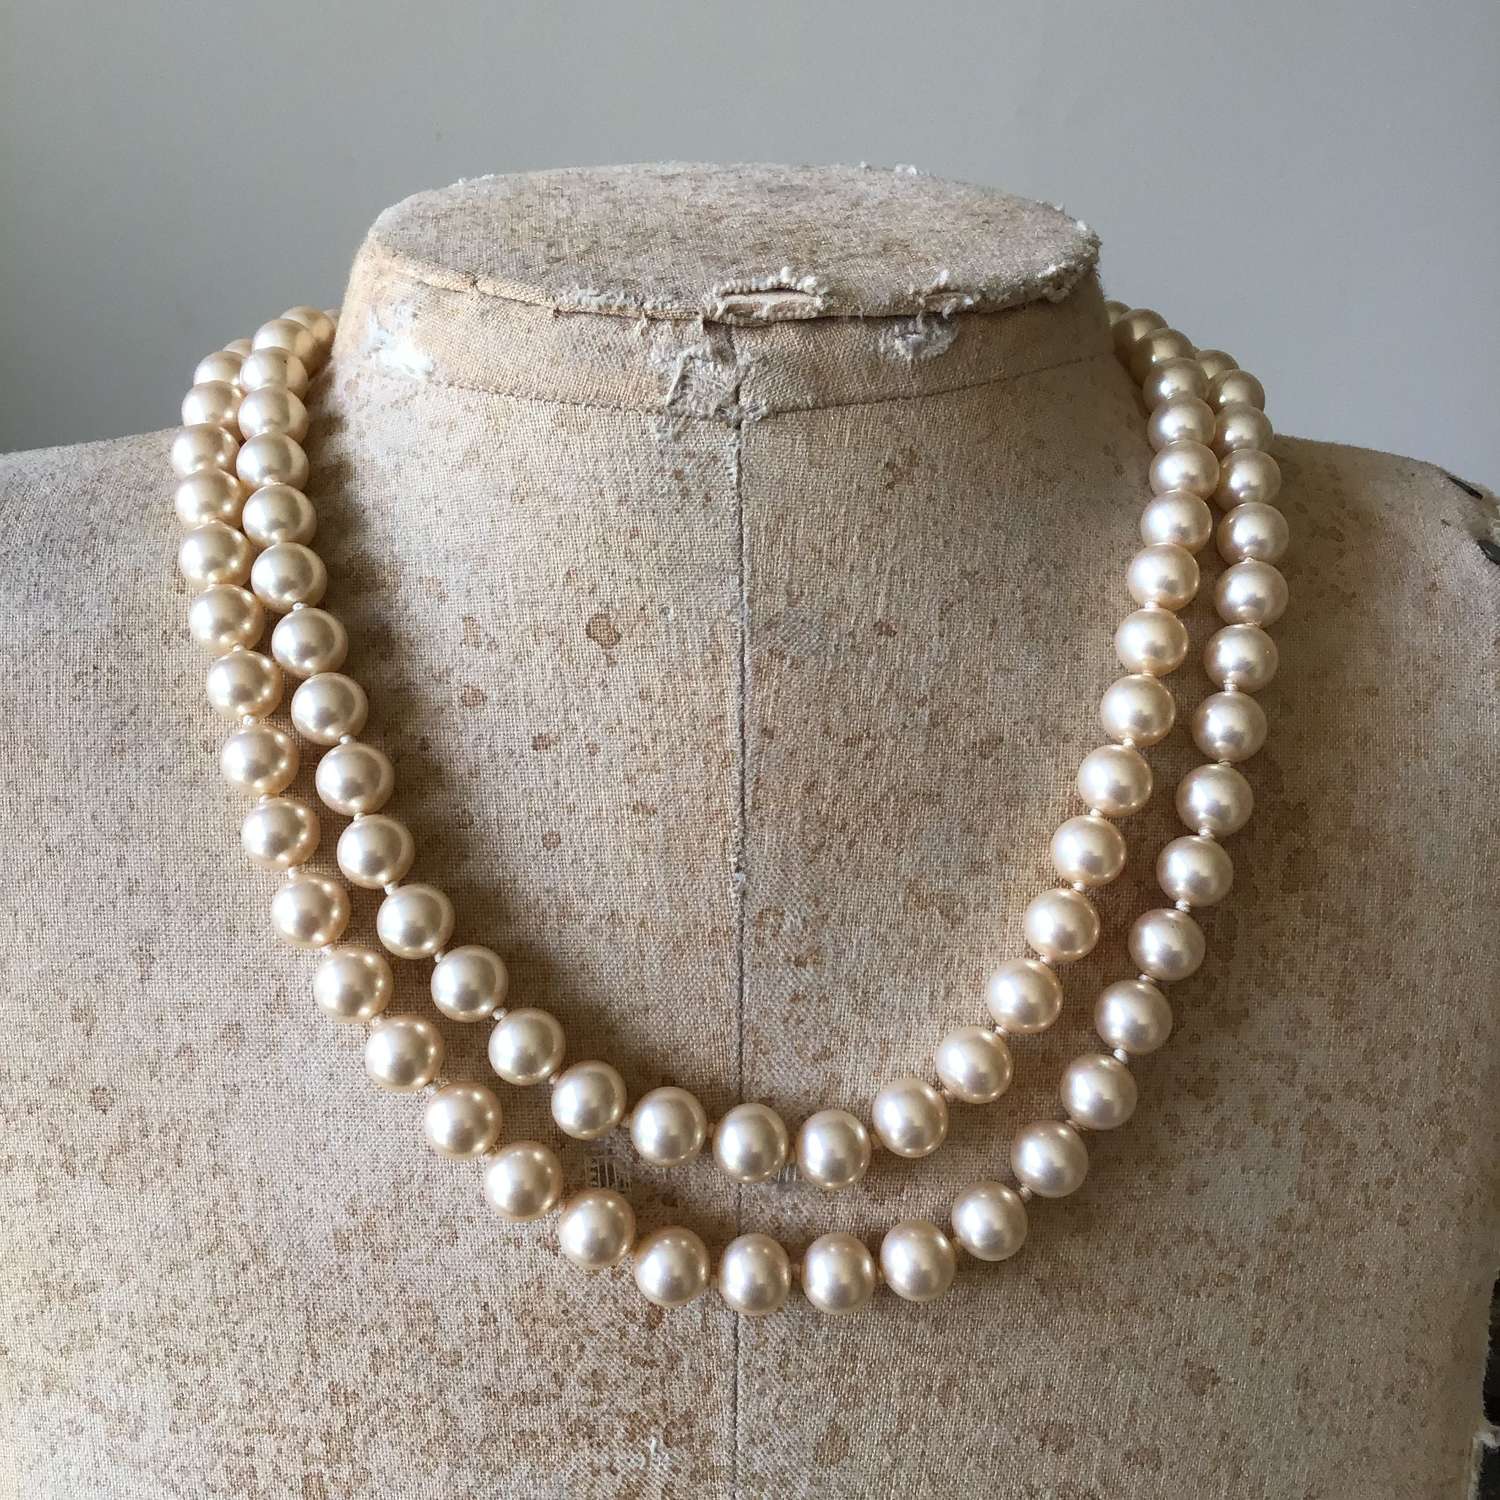 A vintage faux pearl double row  necklace with an ornate clasp